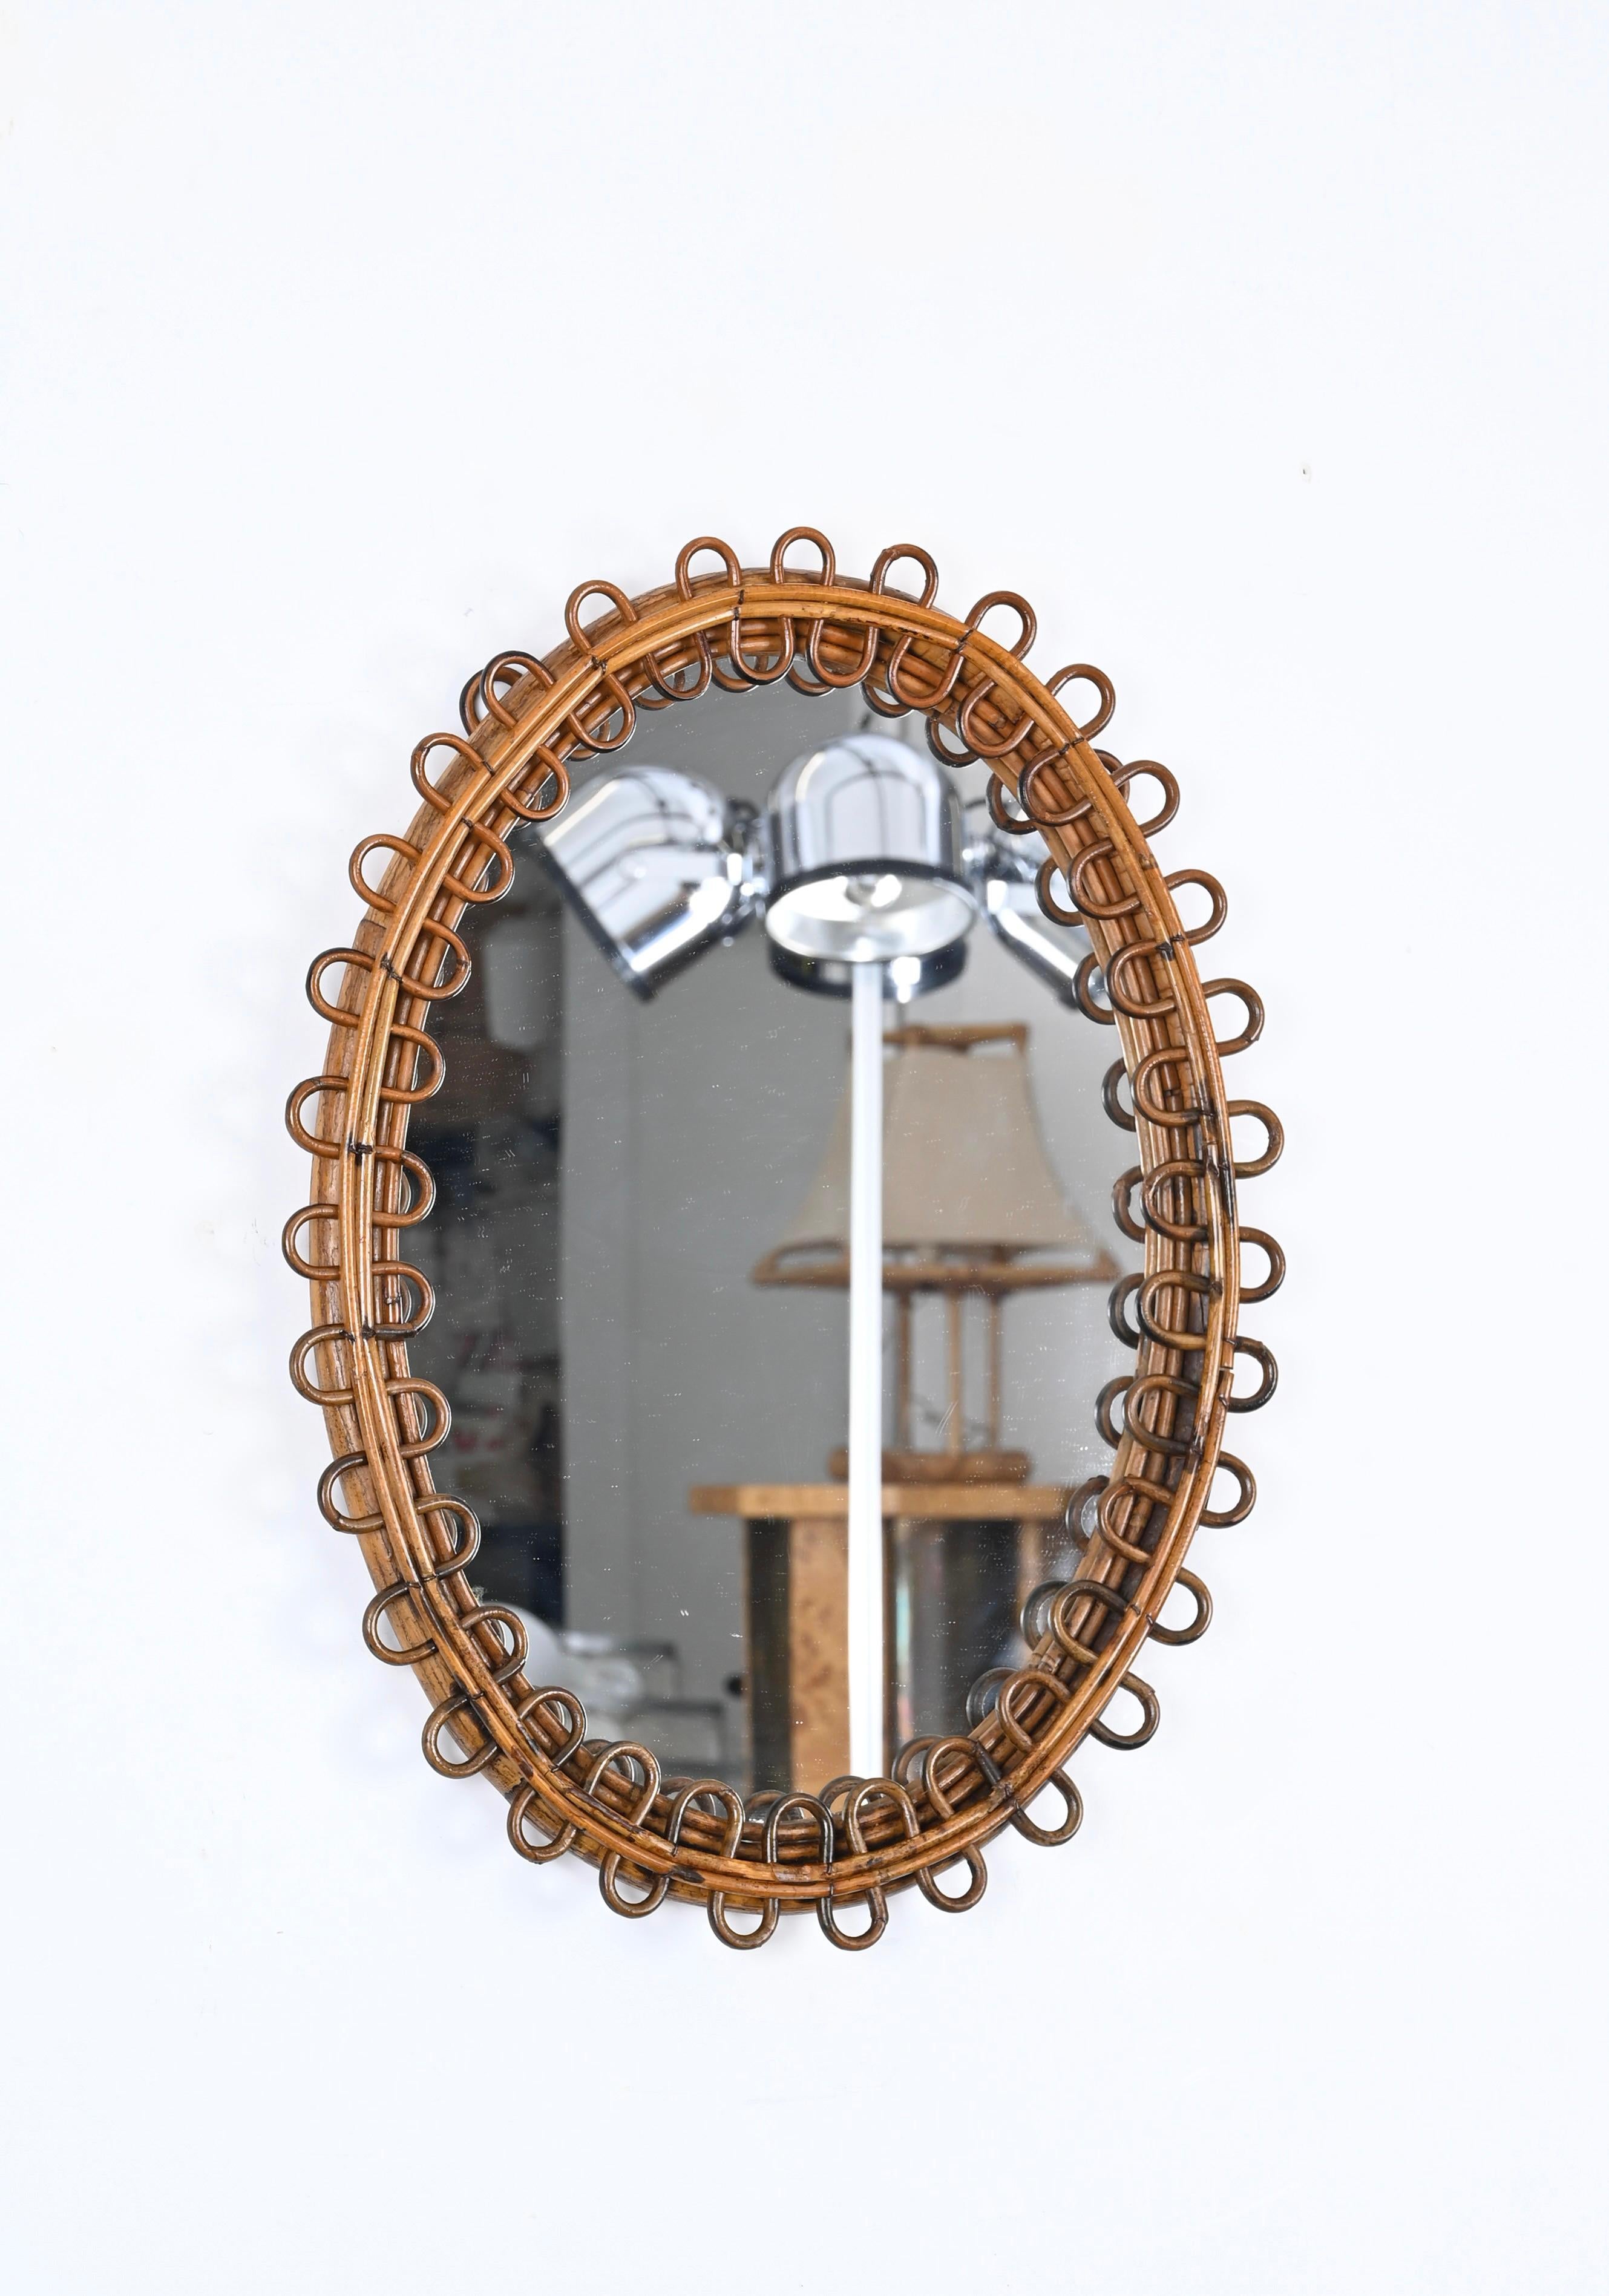 Lovely decorative midcentury oval mirror with curved rattan beams and bamboo frame. This beautiful French Riviera style mirror was produced in Italy in the 1960s.

The mirror features a gorgeous oval double frame in curved bamboo enriched all around